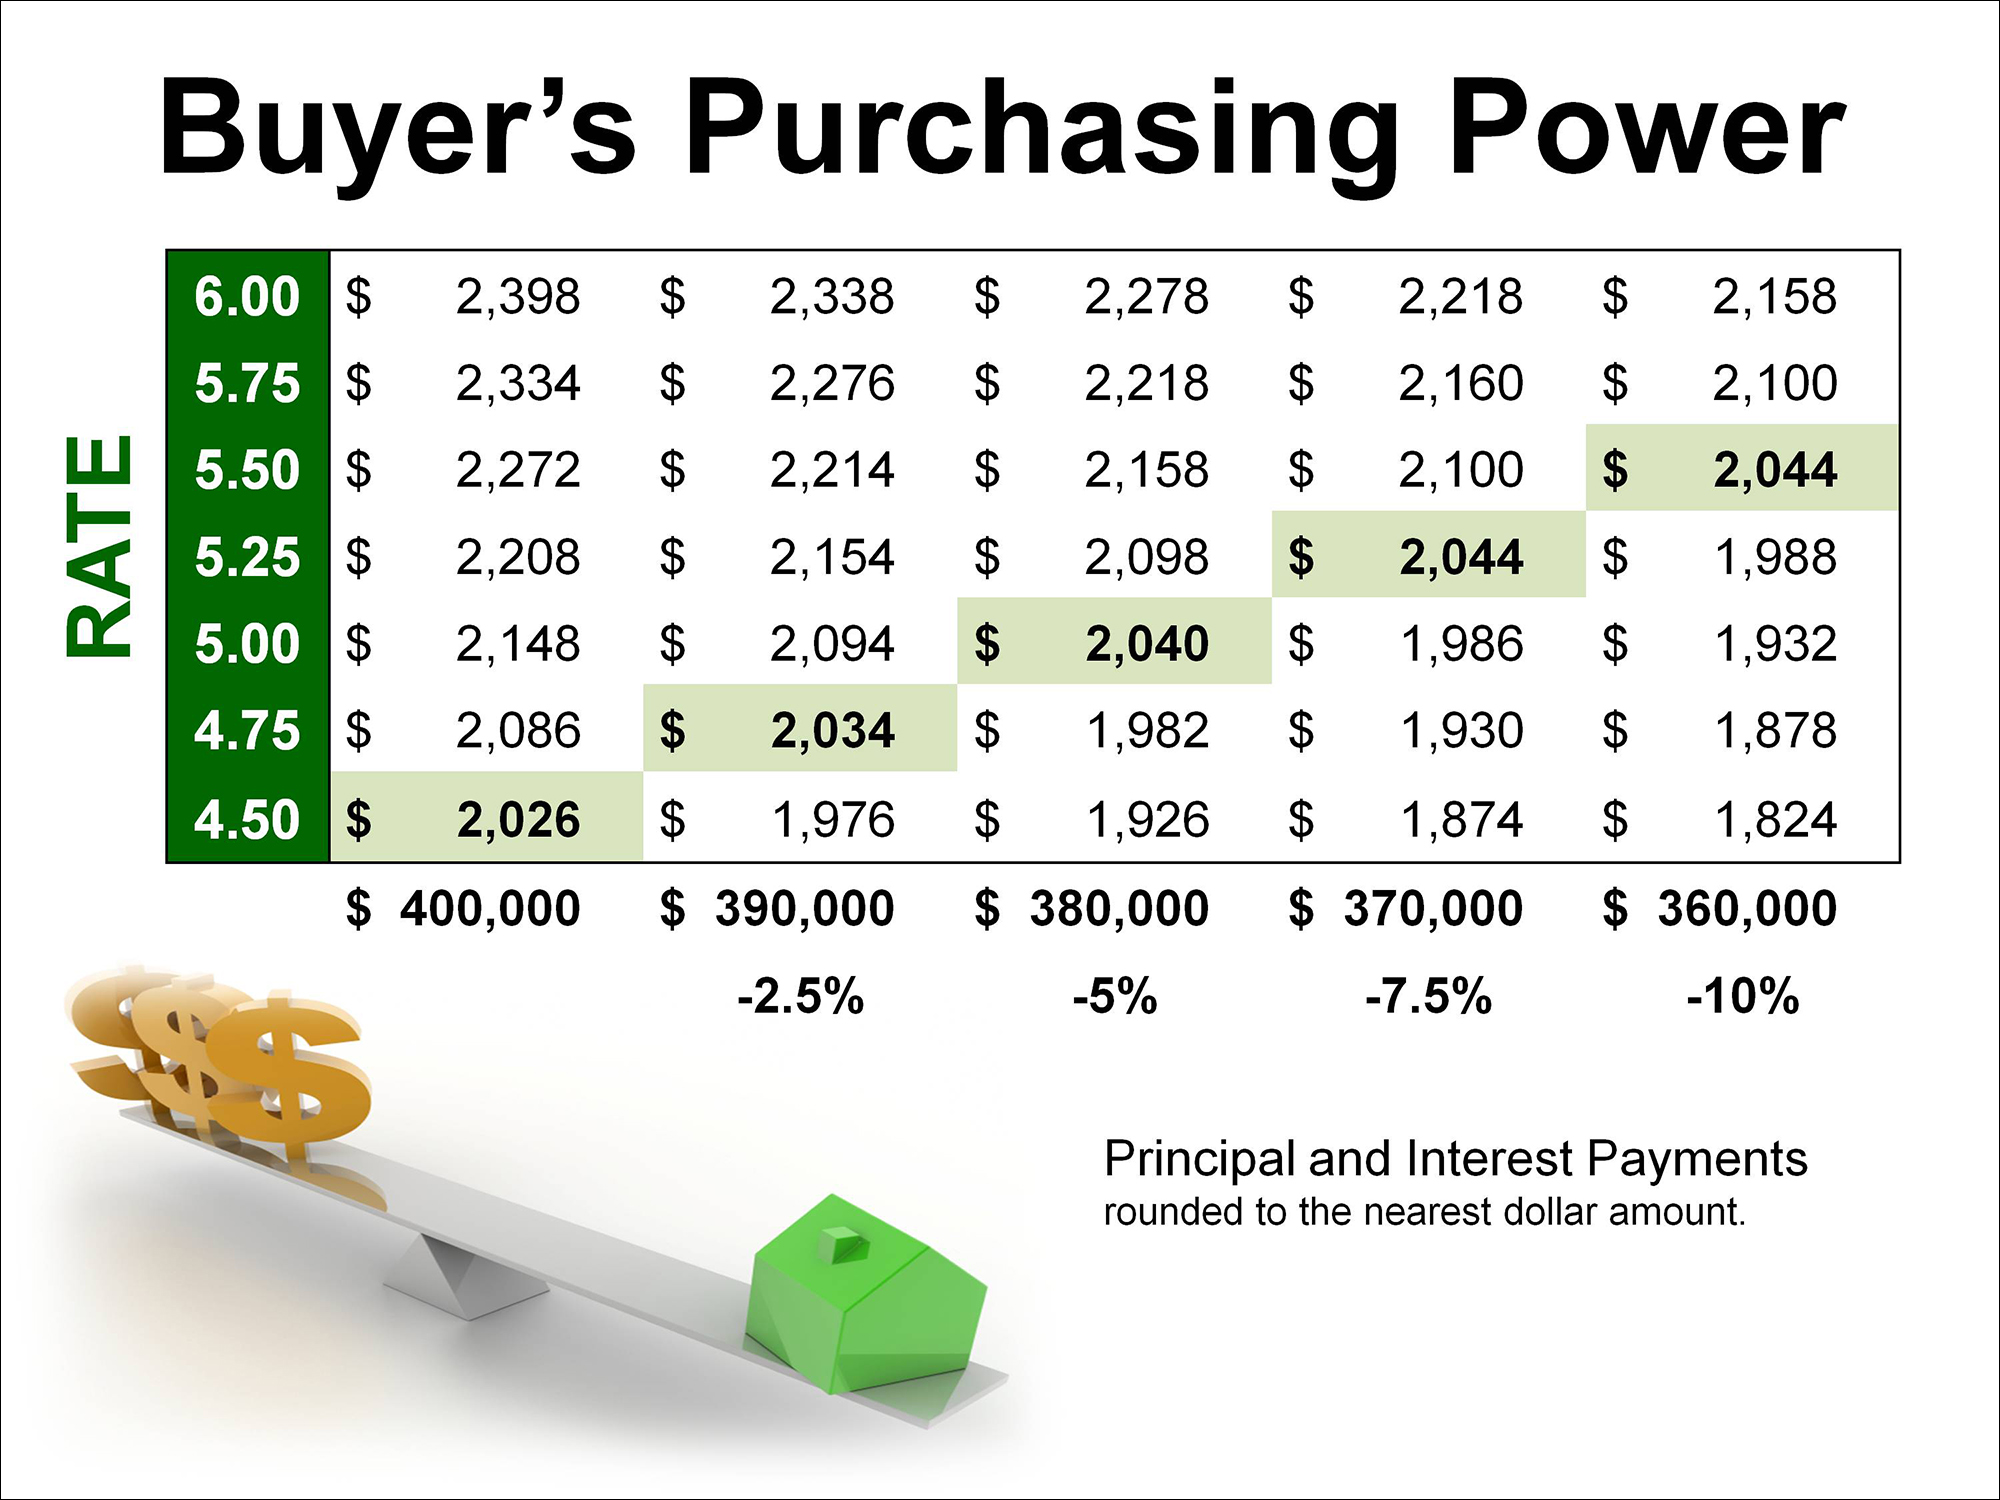 Buyer's Purchasing Power | Keeping Current Matters